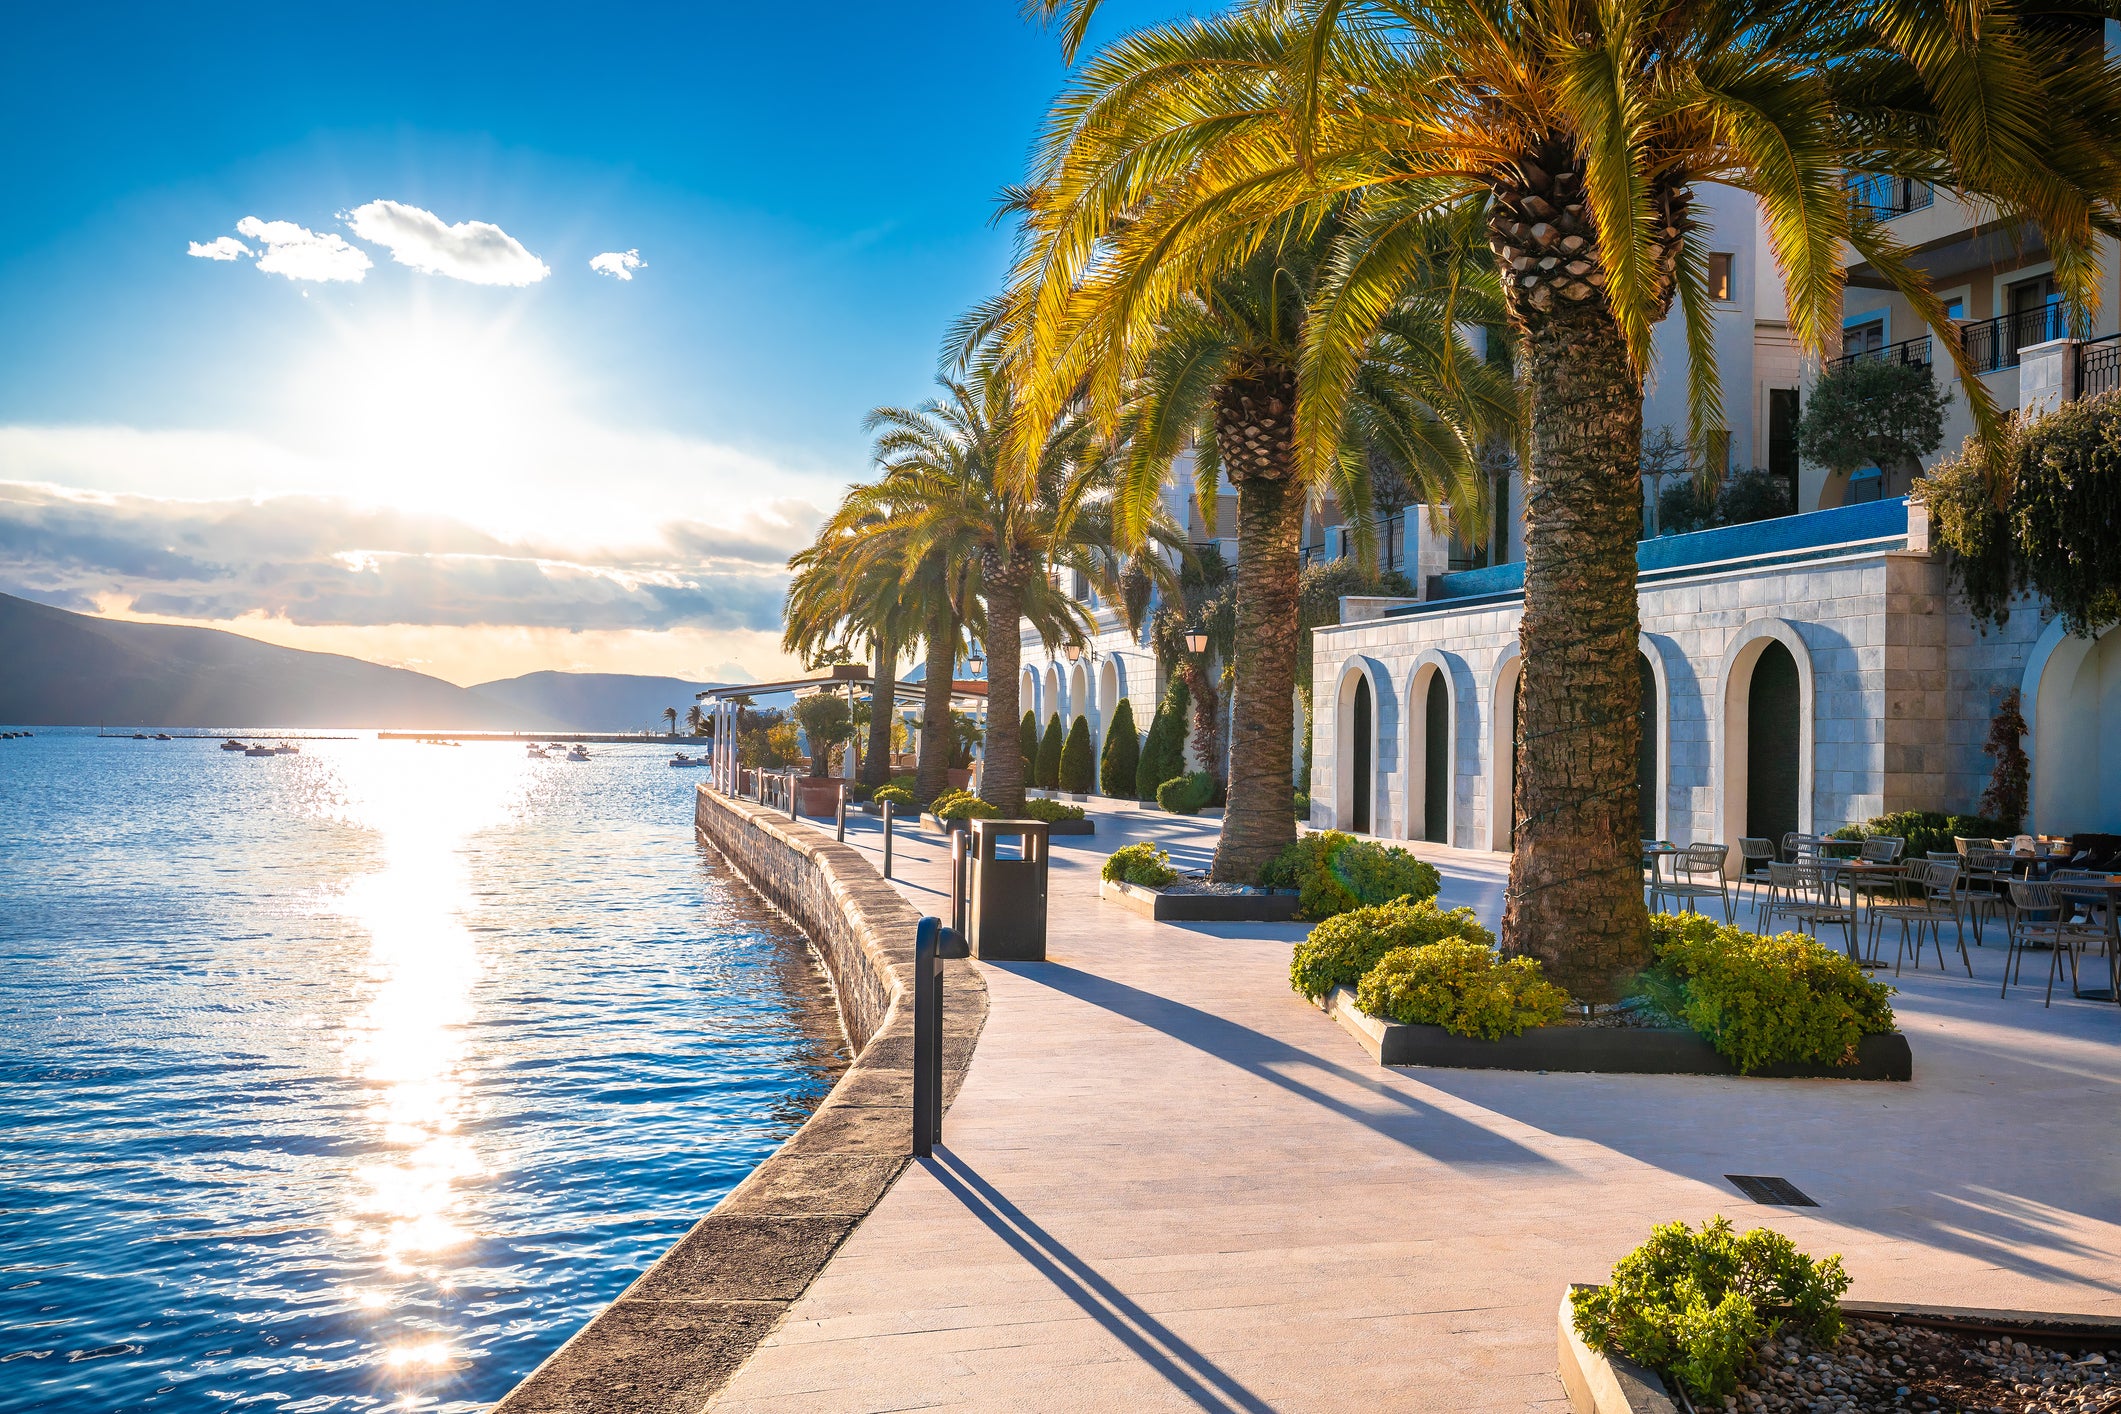 Tivat has drawn comparisions with far pricier holiday destinations